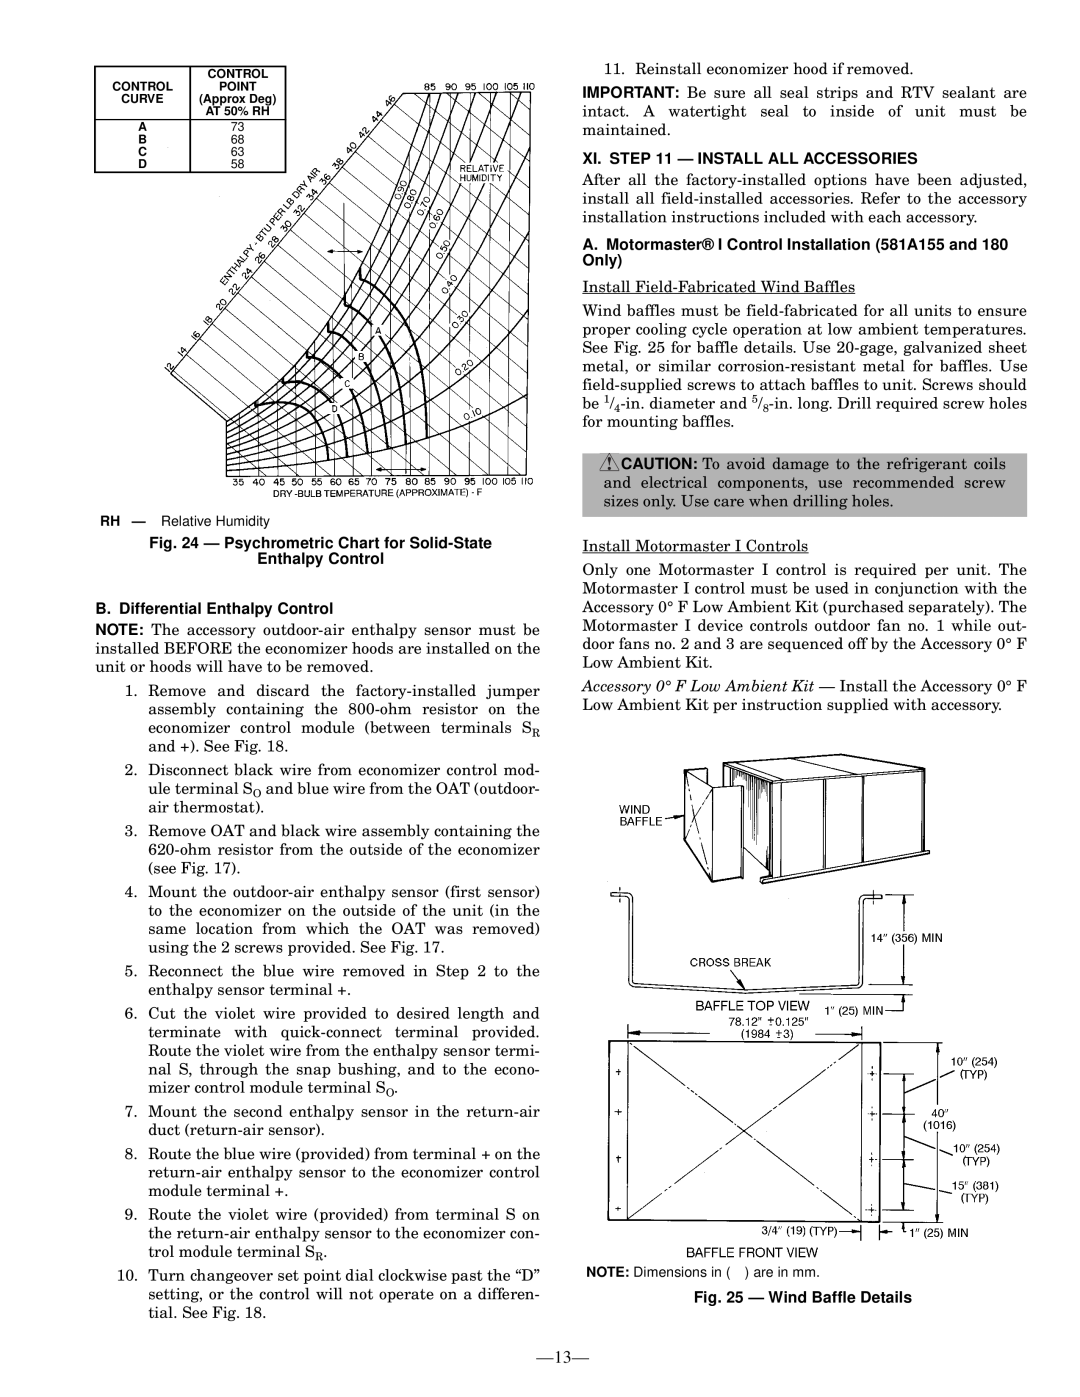 Bryant 581A Psychrometric Chart for Solid-State, Enthalpy Control B. Differential Enthalpy Control, Wind Baffle Details 